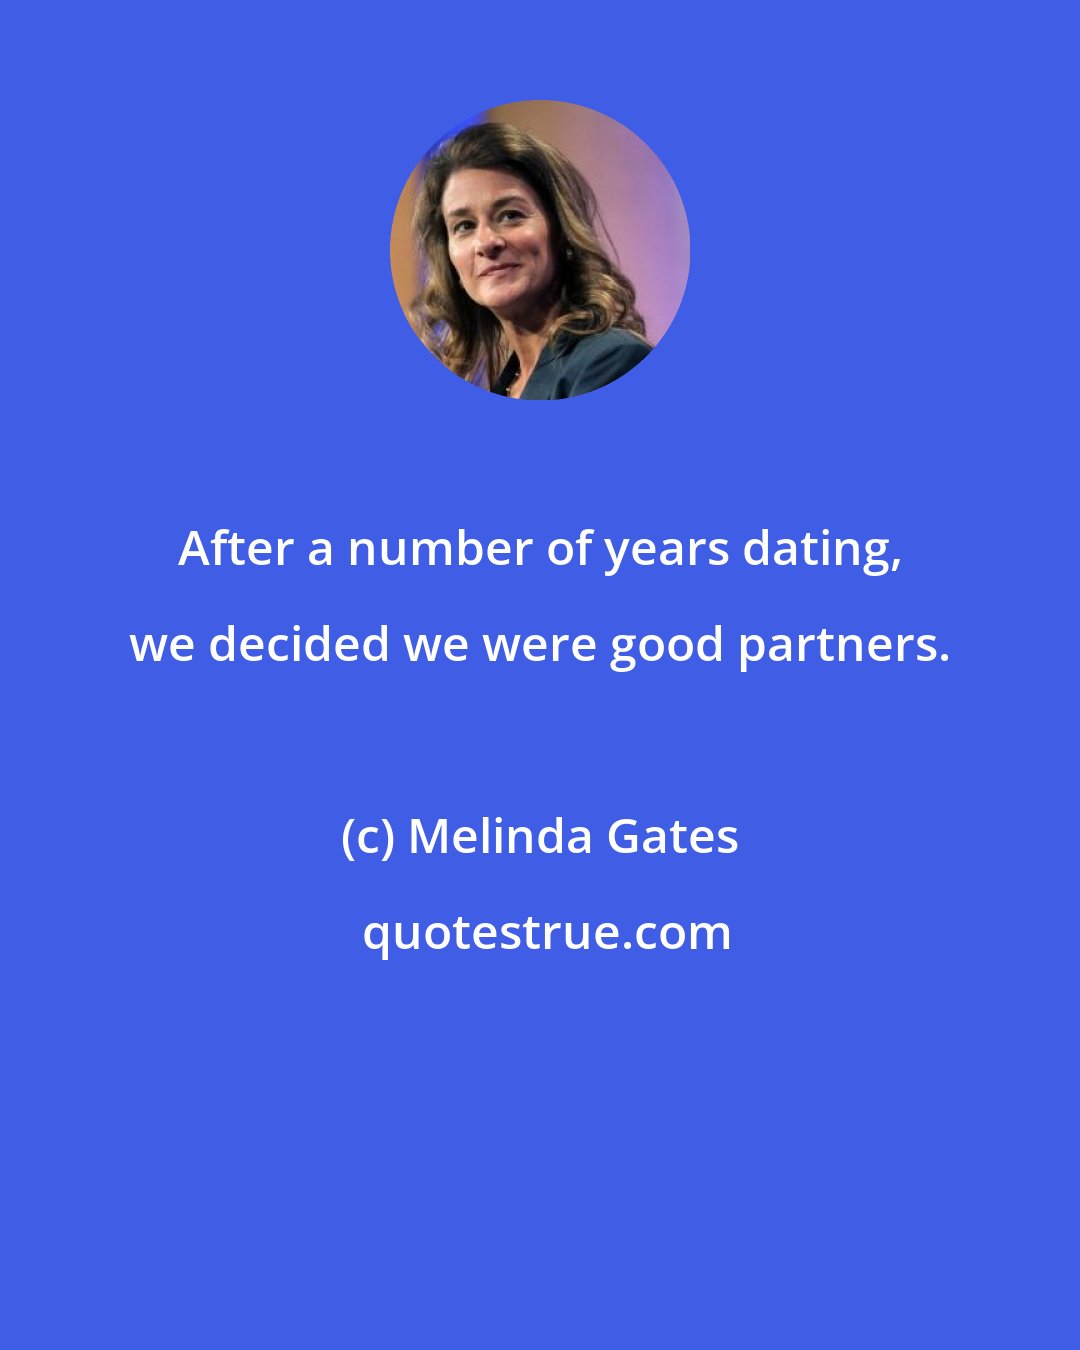 Melinda Gates: After a number of years dating, we decided we were good partners.